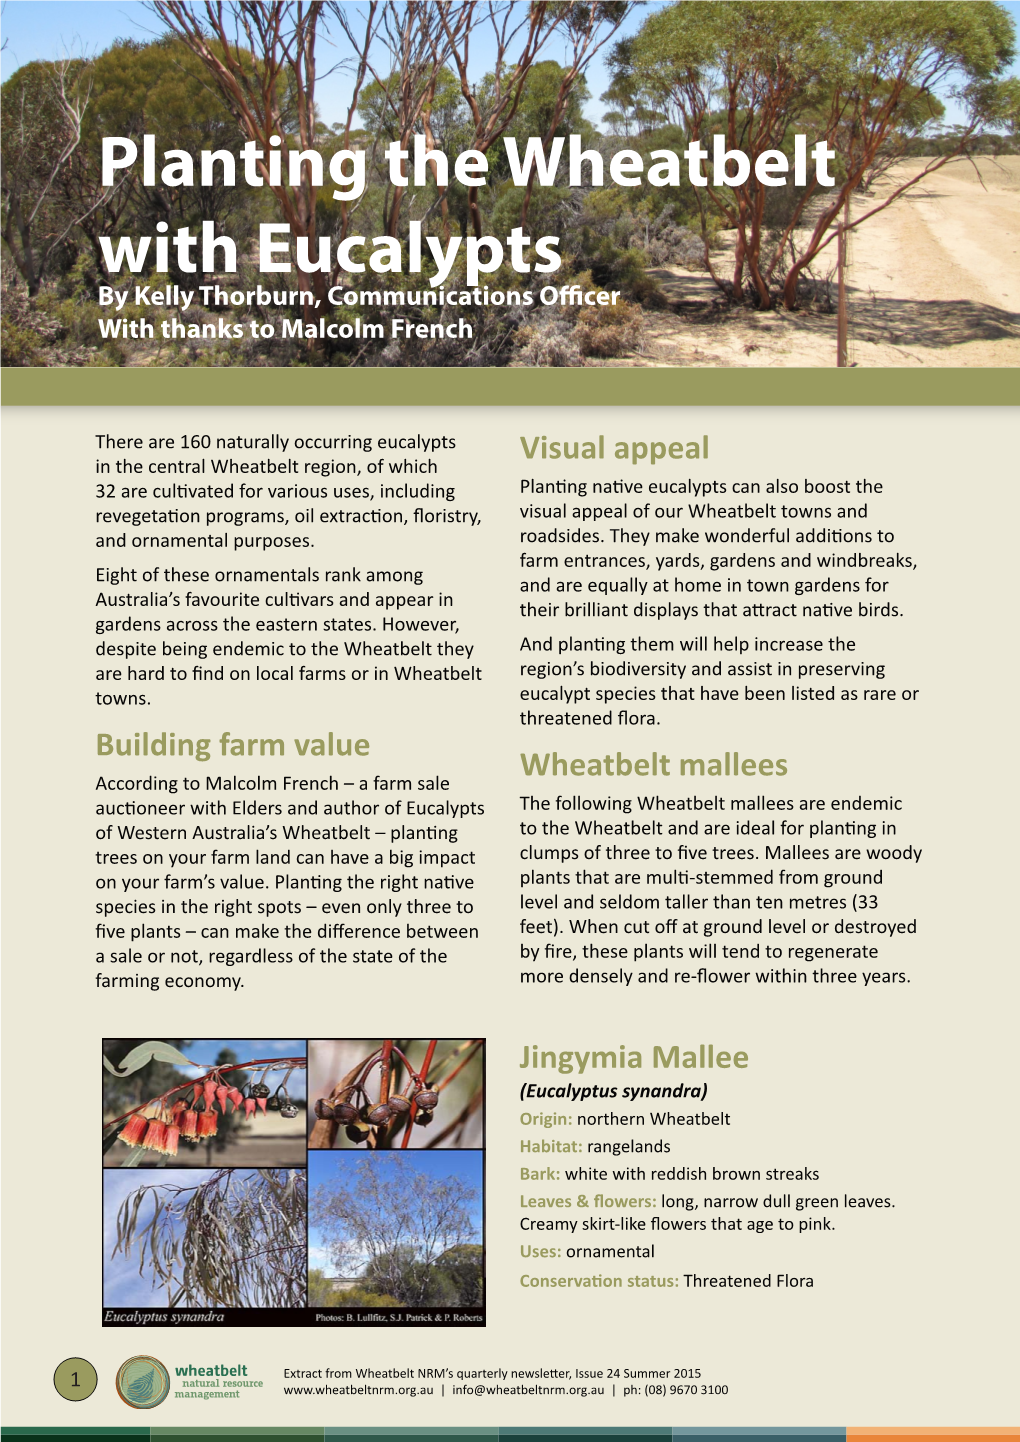 Planting the Wheatbelt with Eucalypts by Kelly Thorburn, Communications Officer with Thanks to Malcolm French